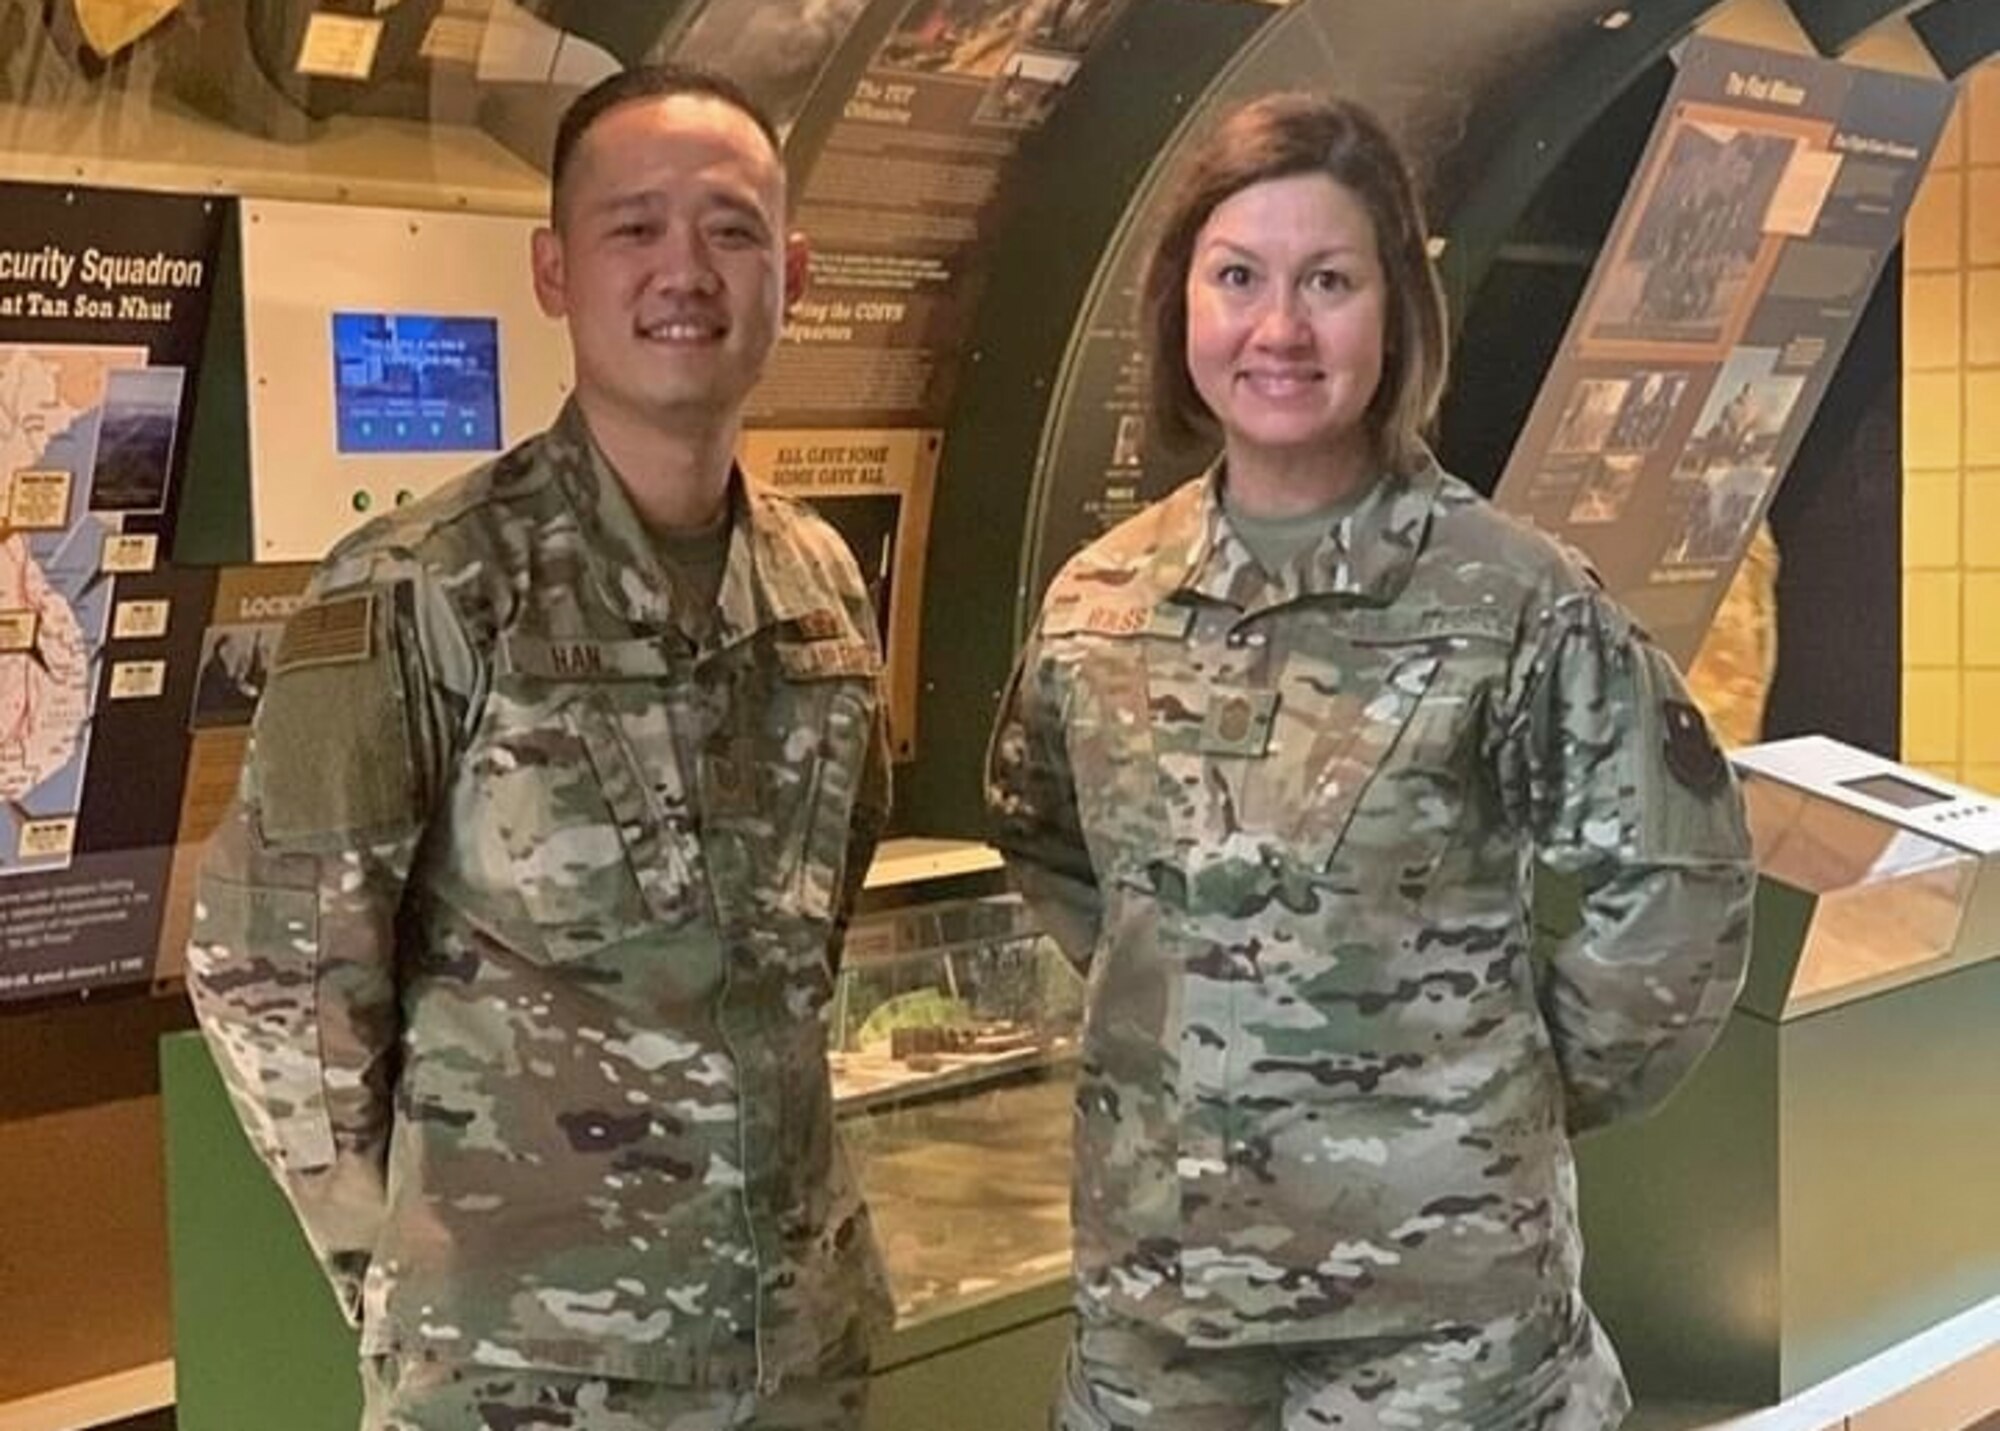 U.S. Air Force Tech. Sgt. Samuel Han, 316th Training Squadron instructor, and Chief Master Sgt. JoAnne S. Bass, Chief Master Sgt. of the Air Force, stand at parade rest in the Norma Brown building, on Goodfellow Air Force Base, Texas, November 20, 2019. Han considers Bass a mentor, they met while Bass was the 2nd Air Force Command Chief. (Courtesy photo)